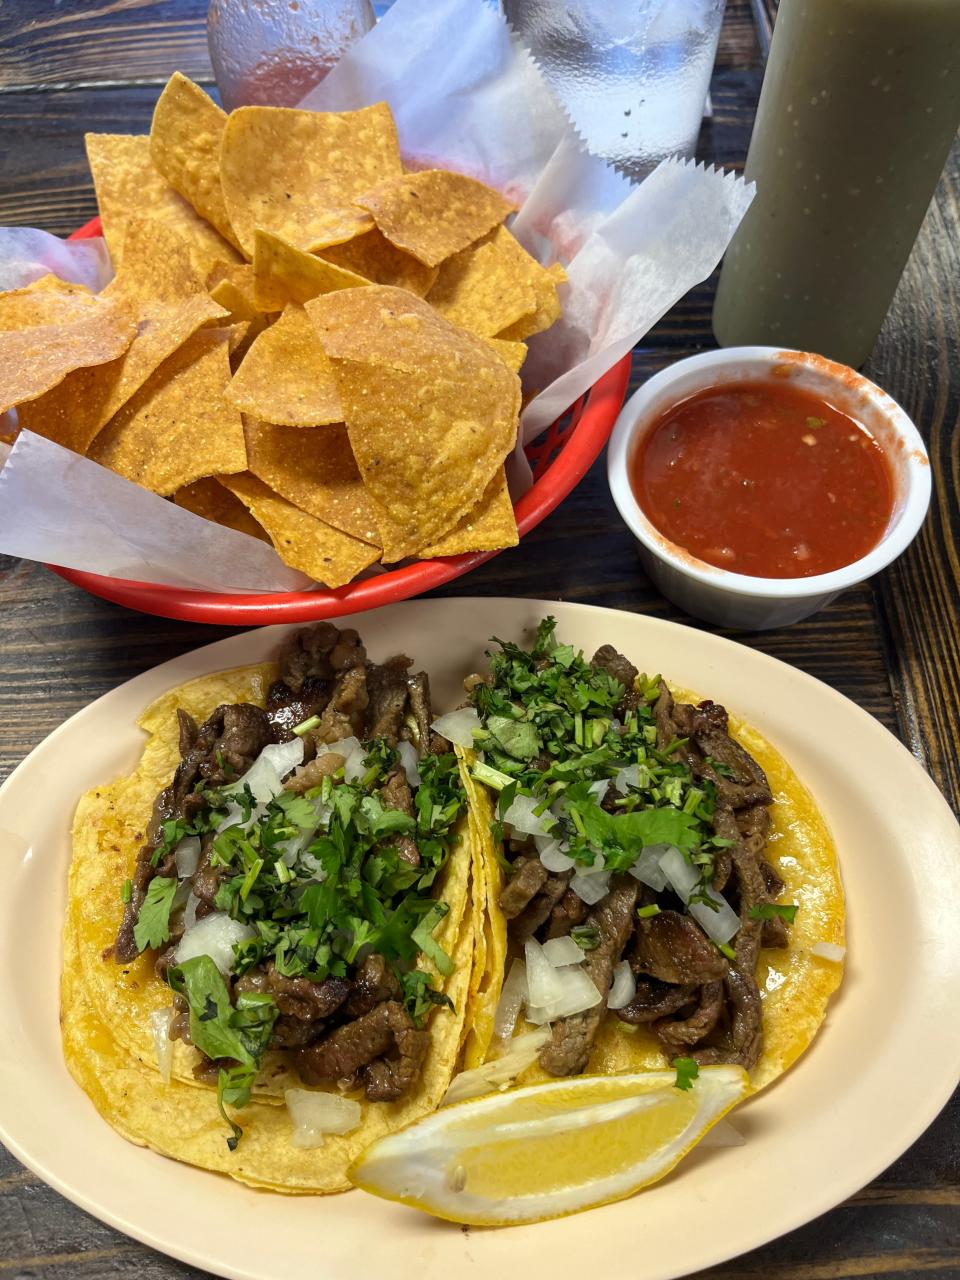 Carne Asada Tacos at Picosos. The authentic Mexican restaurant is located at 3937 Summer Ave. in Memphis.